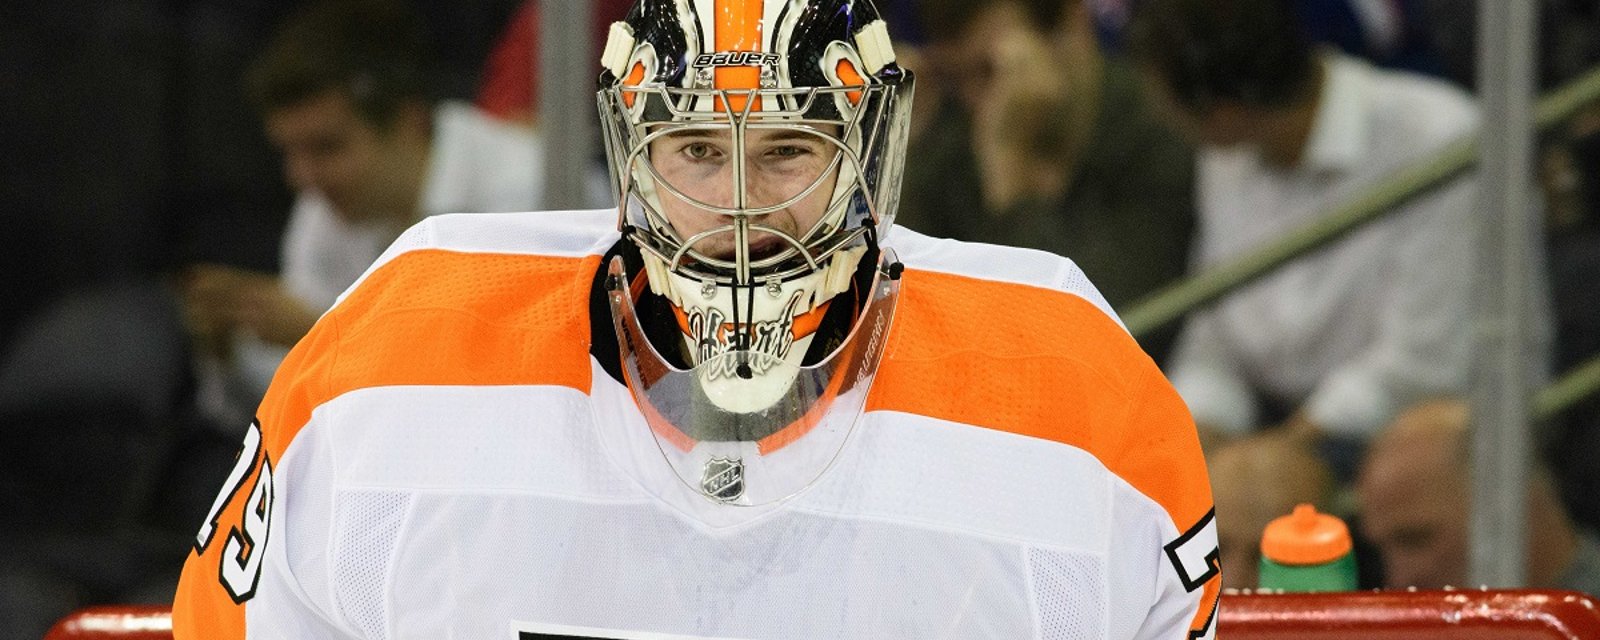 Flyers goalie prospect wants to come to the NHL now.